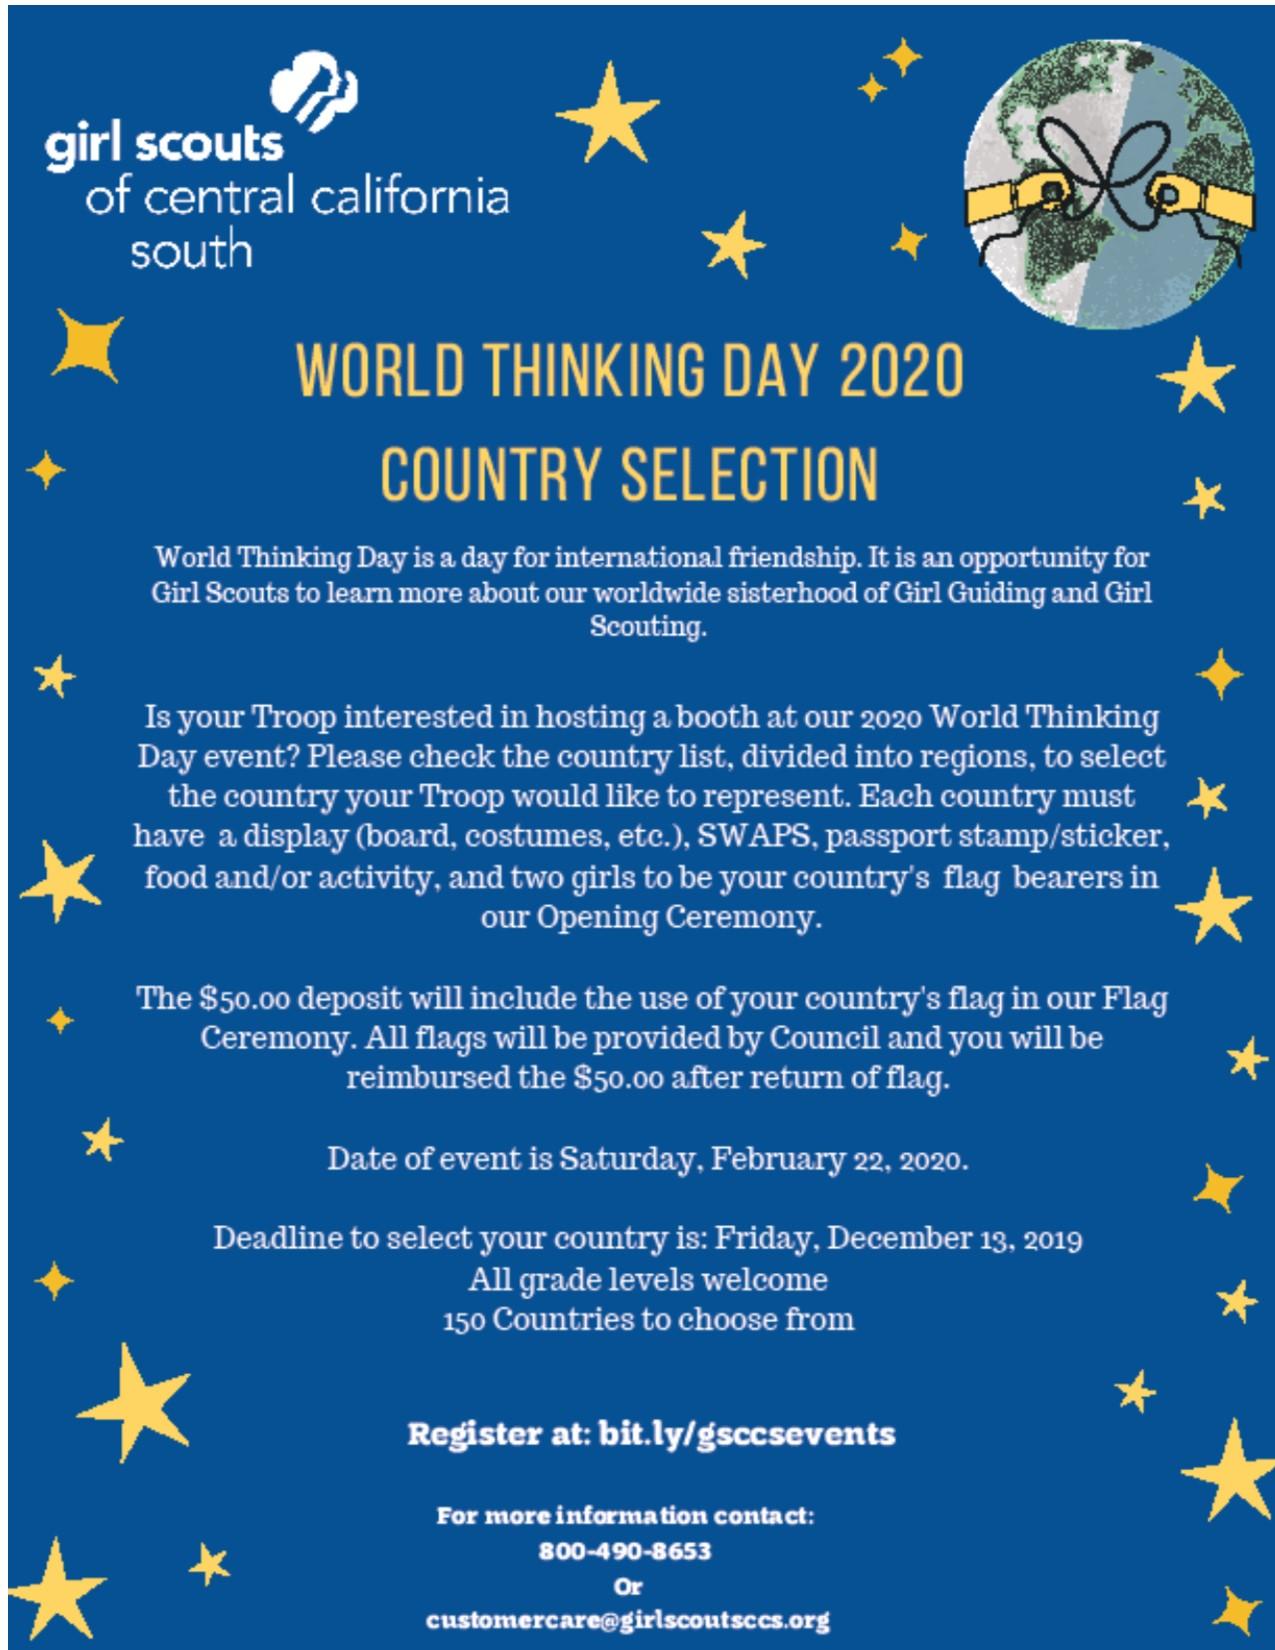 world-thinking-day-country-selection-part-1-21-feb-2020